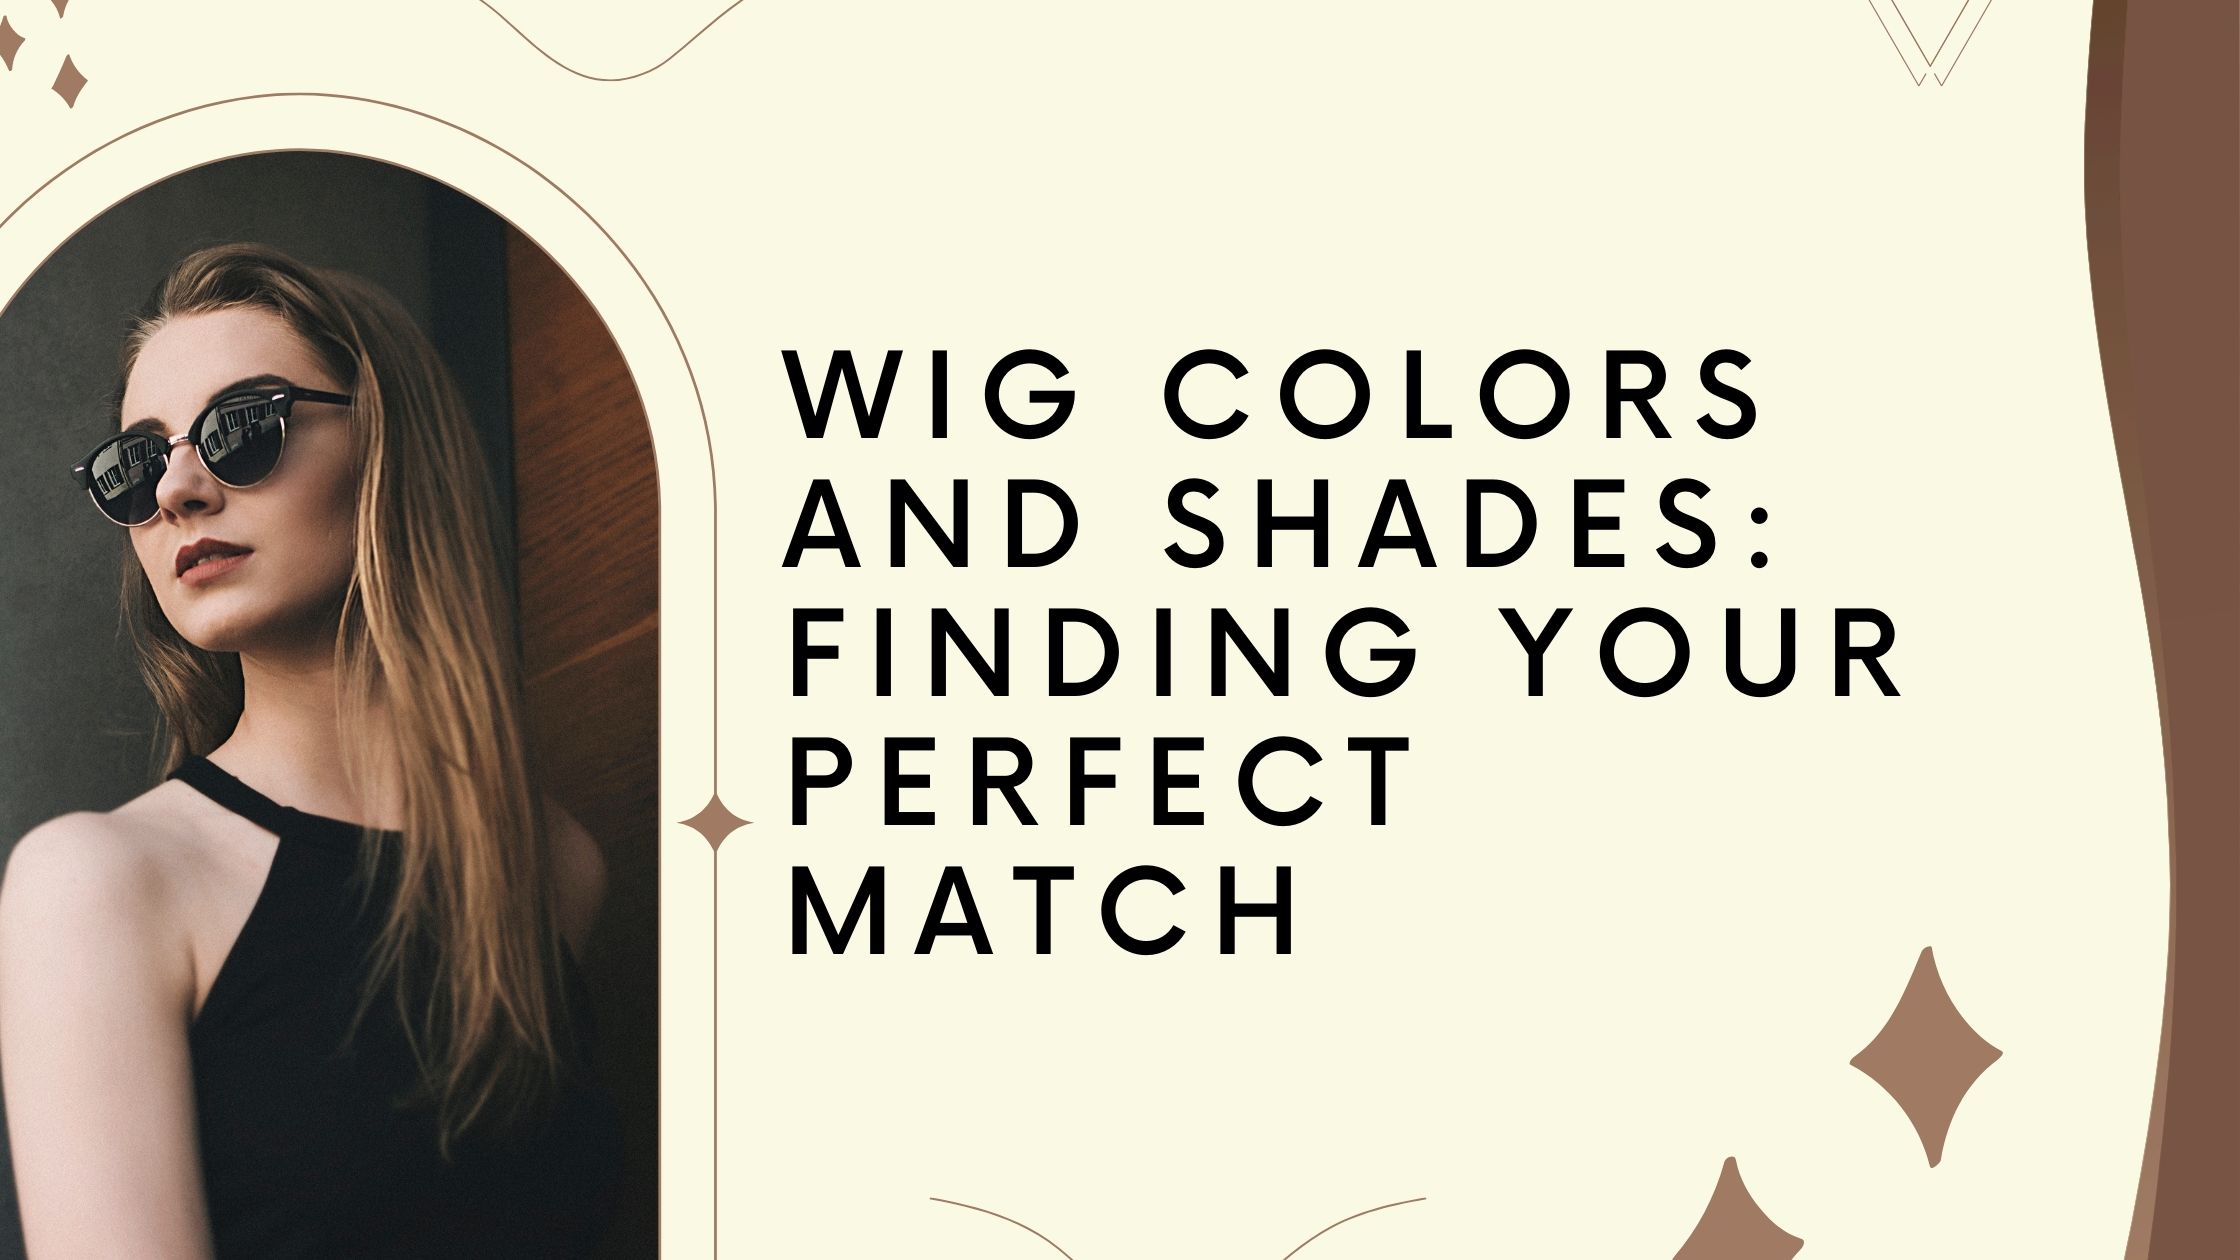 Wig Colors and Shades: Finding Your Perfect Match